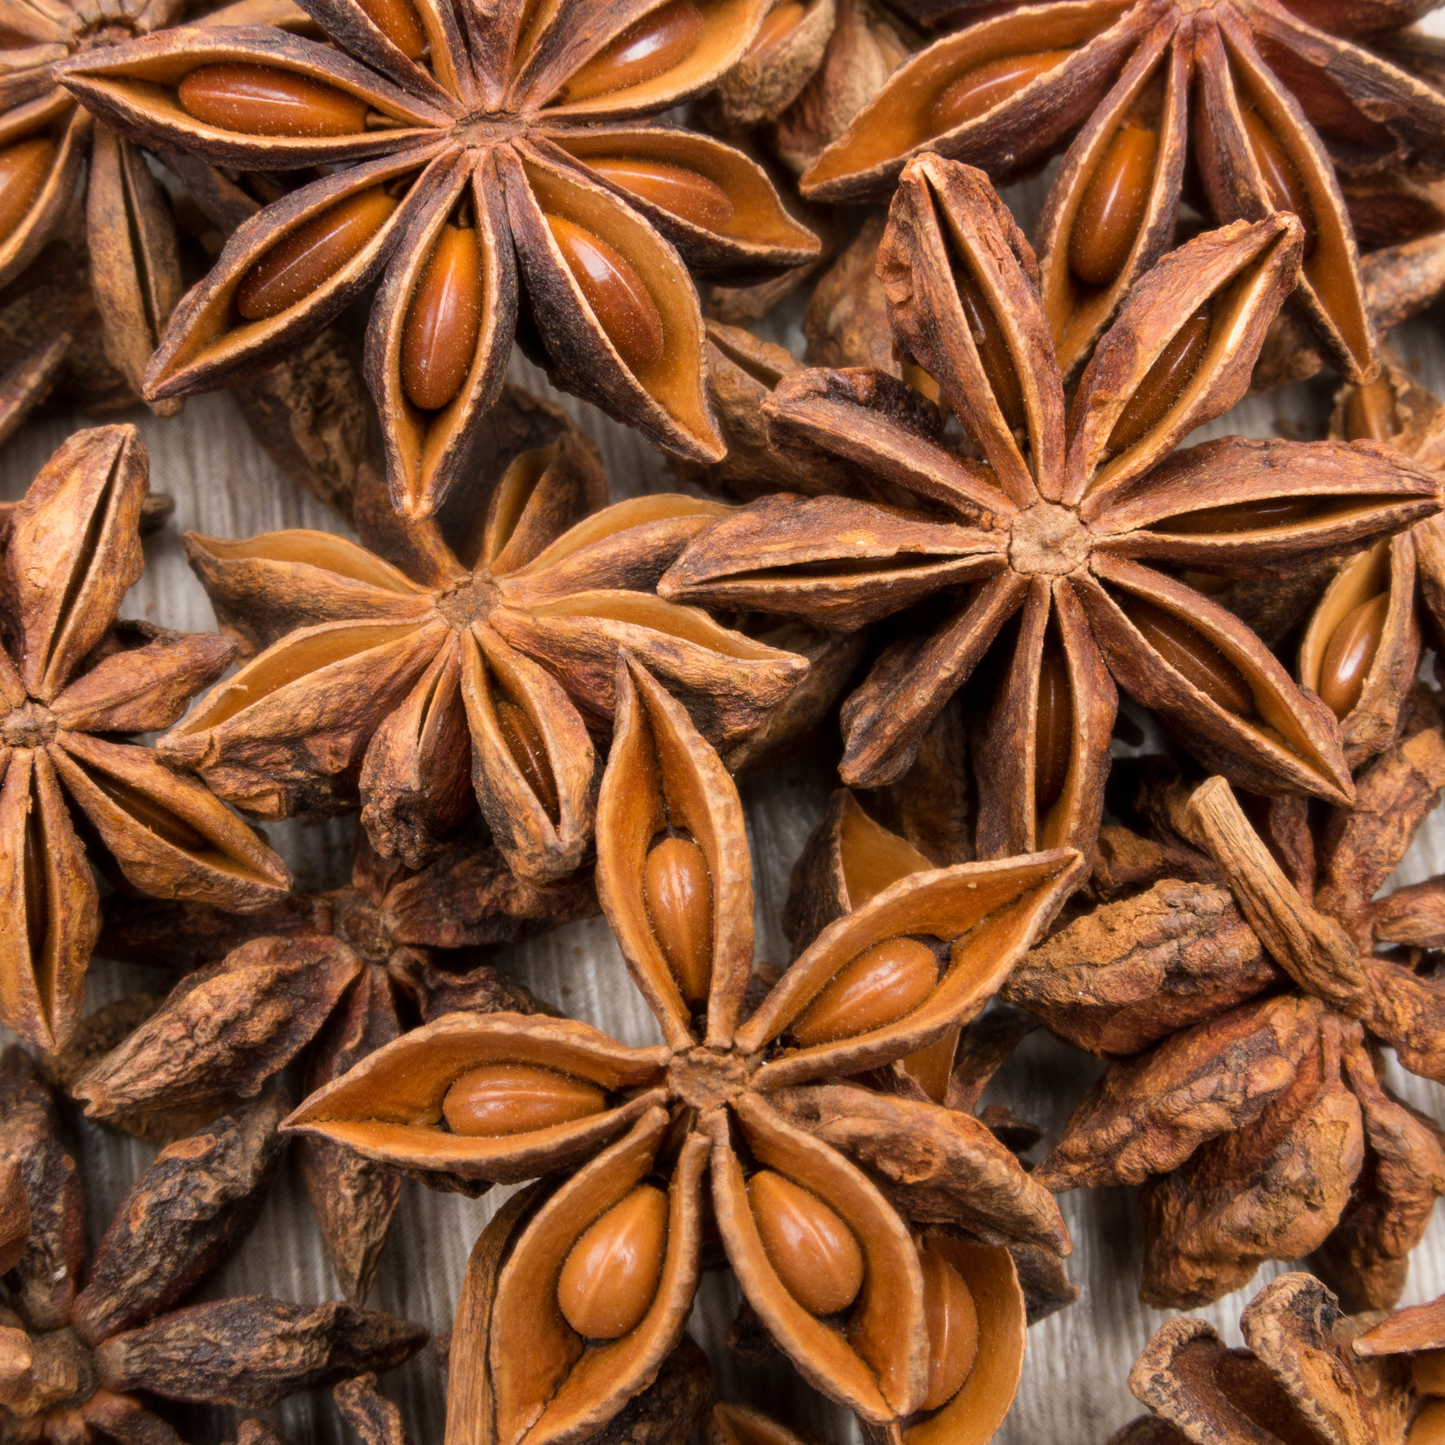 Anise Stars, Whole and Pieces Herb